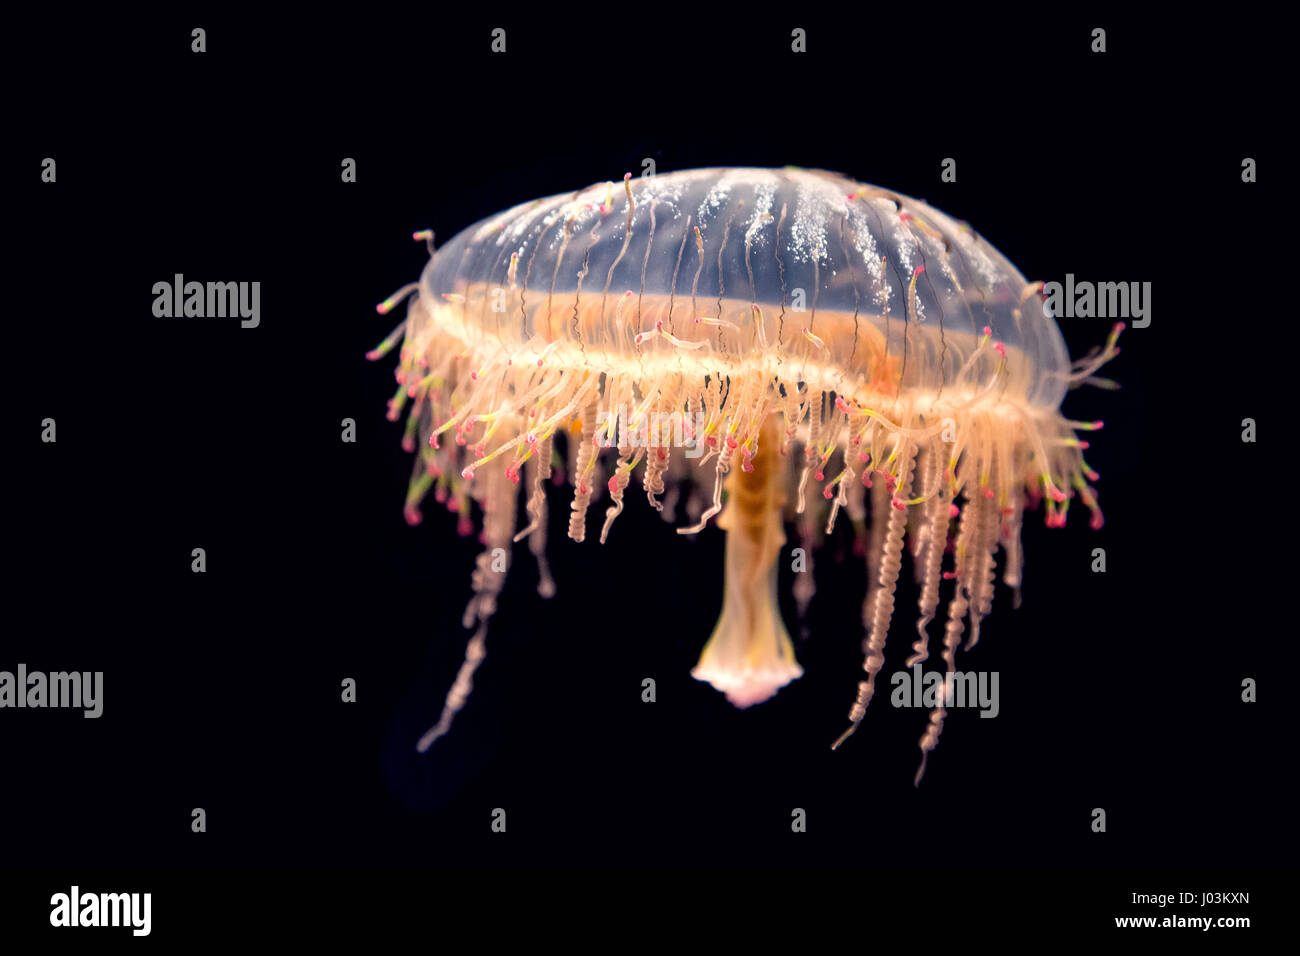 Japanese flower hat jelly, Olindias formosus, found in the West Pacific off of southern Japan. Isolated on black background. Stock Photo